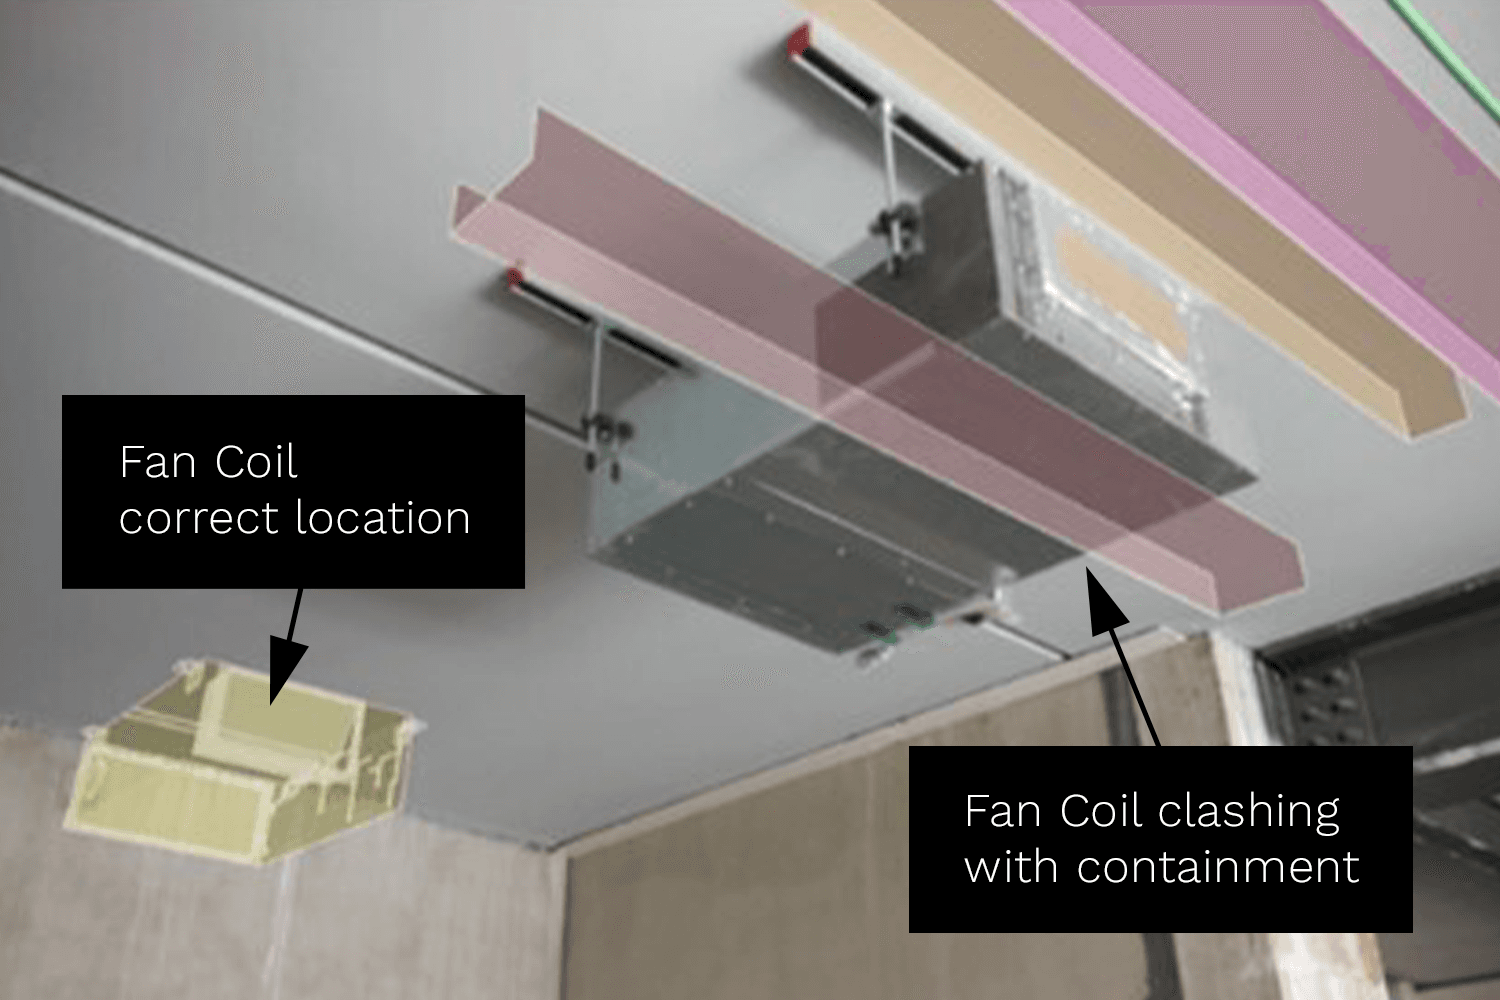 Incorrect installation of the fan coil